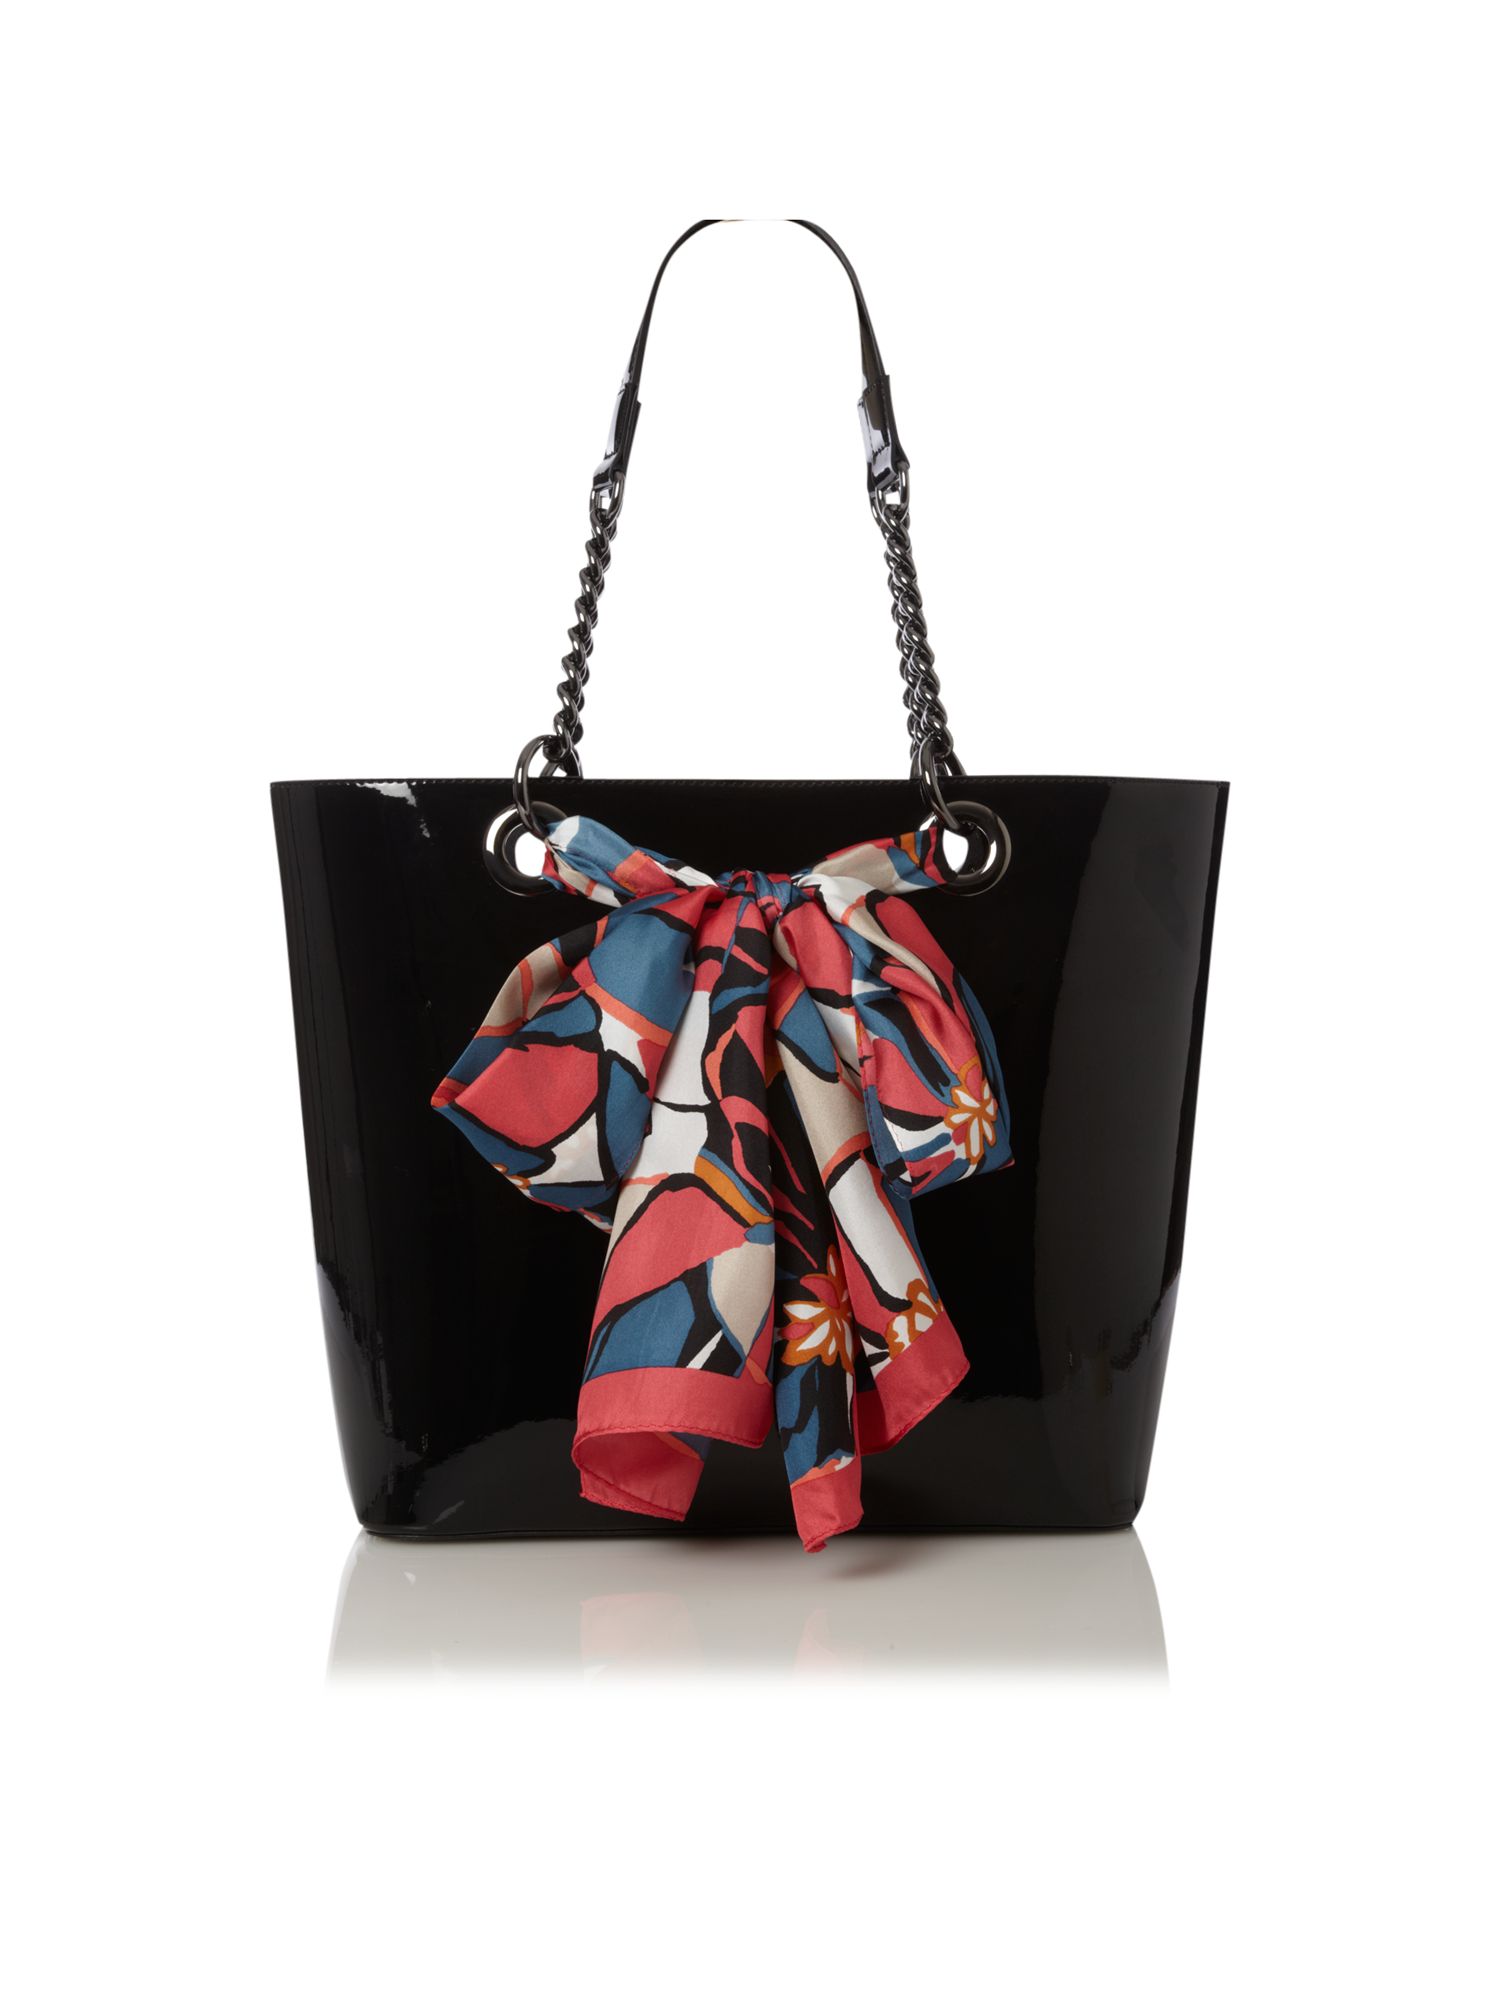 Dkny Patent Large Scarf Tote Bag in Black | Lyst